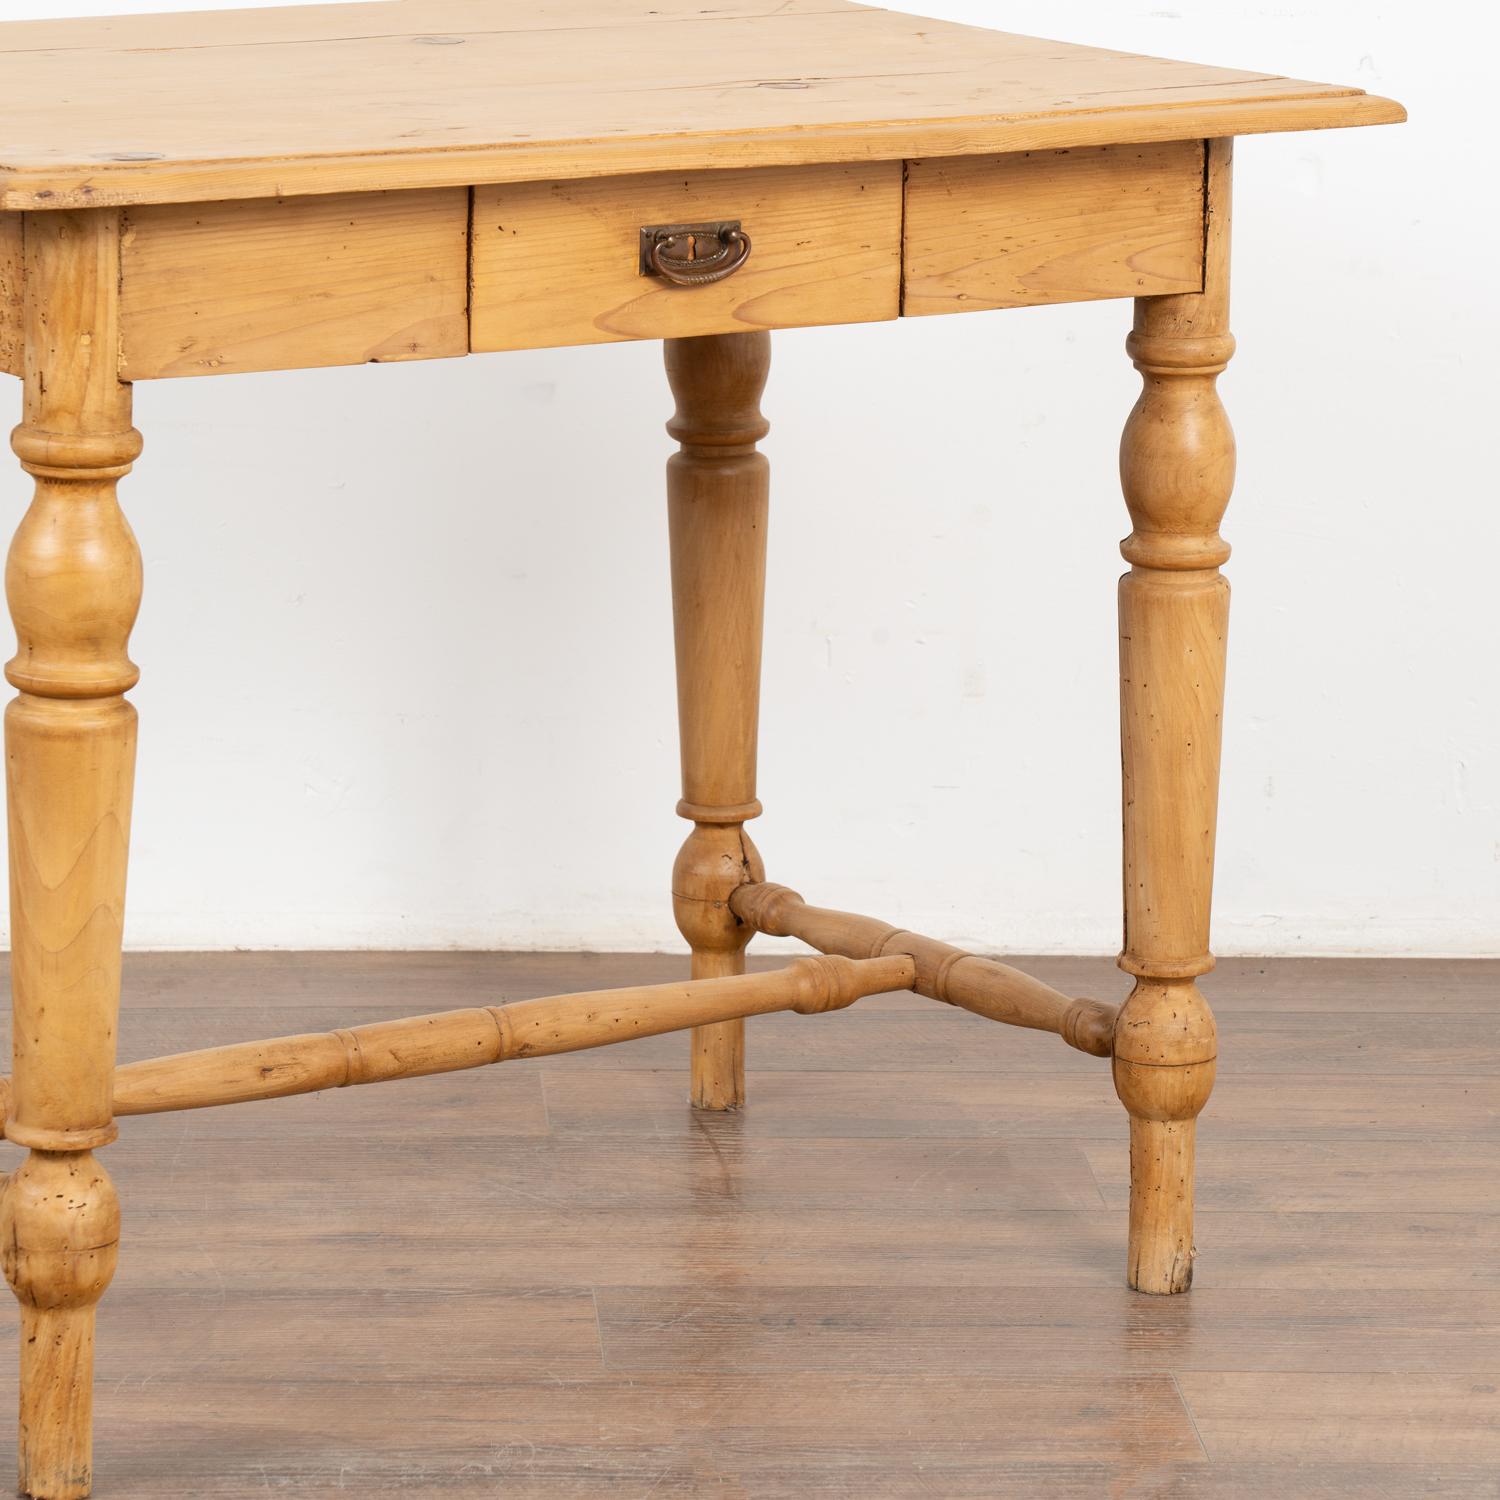 Pine Side Table With Turned Legs and Drawer, Denmark circa 1880-1900 For Sale 1